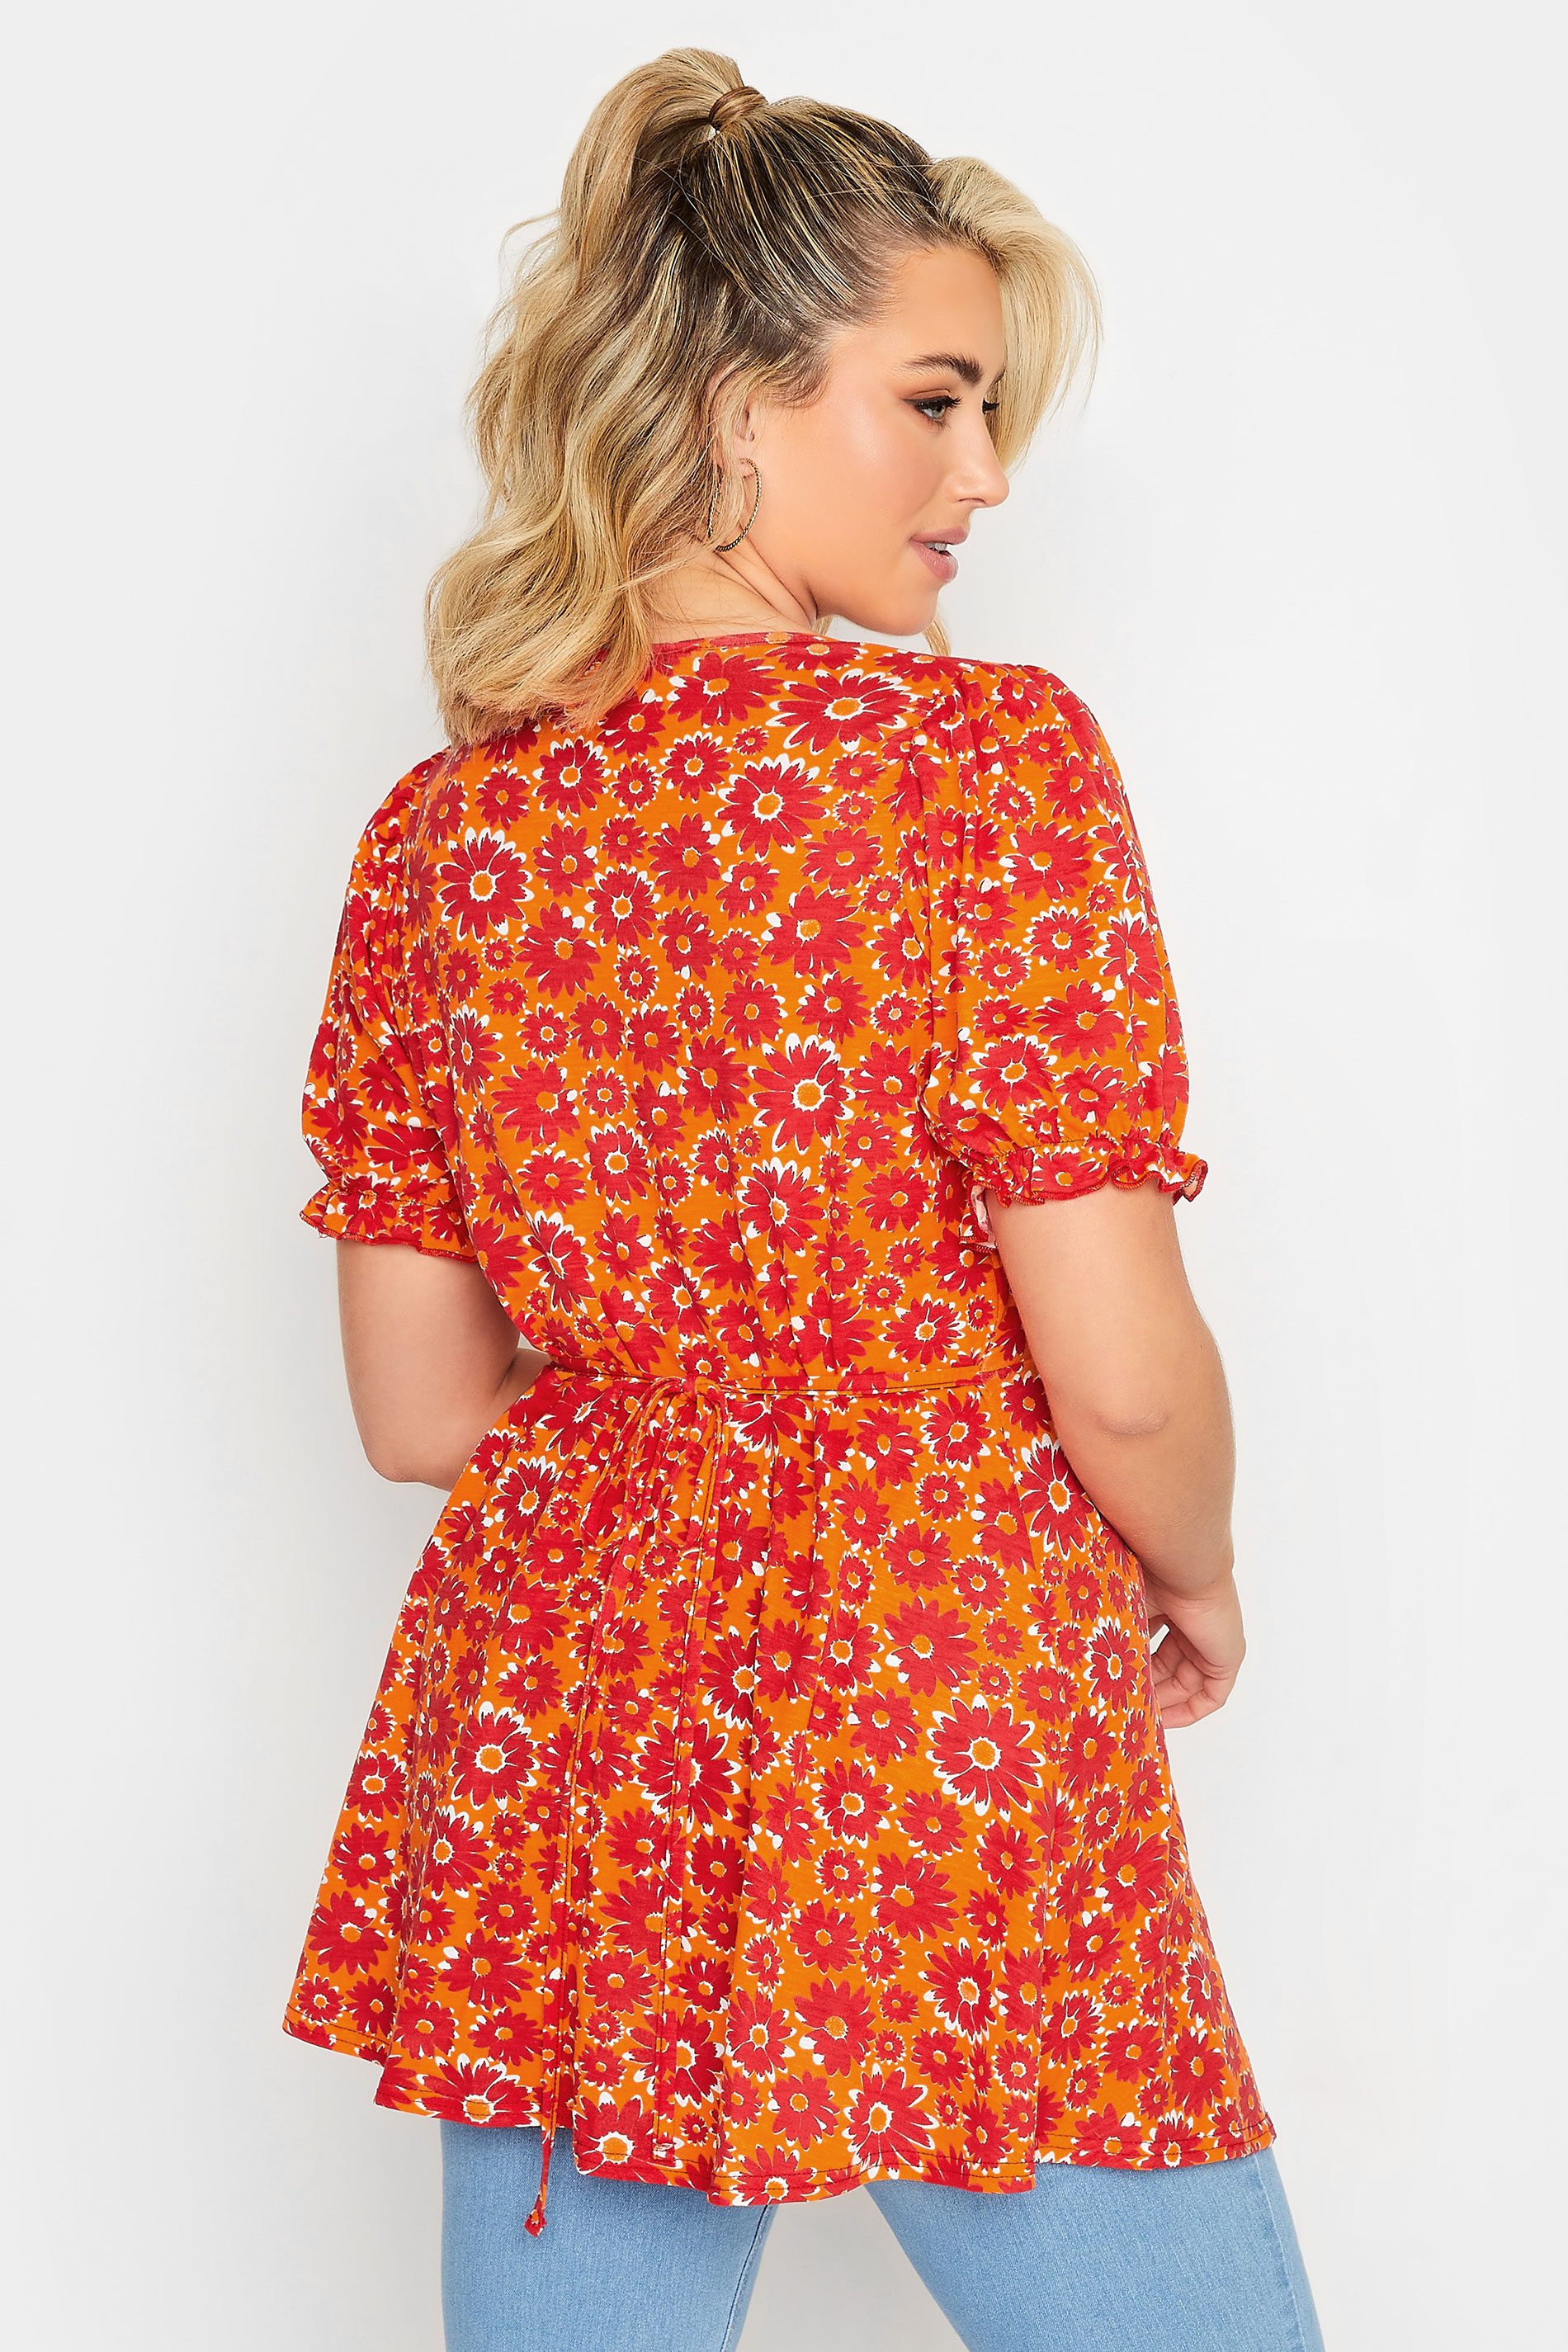 LIMITED COLLECTION Plus Size Orange Floral Frill Sleeve Top | Yours Clothing 3